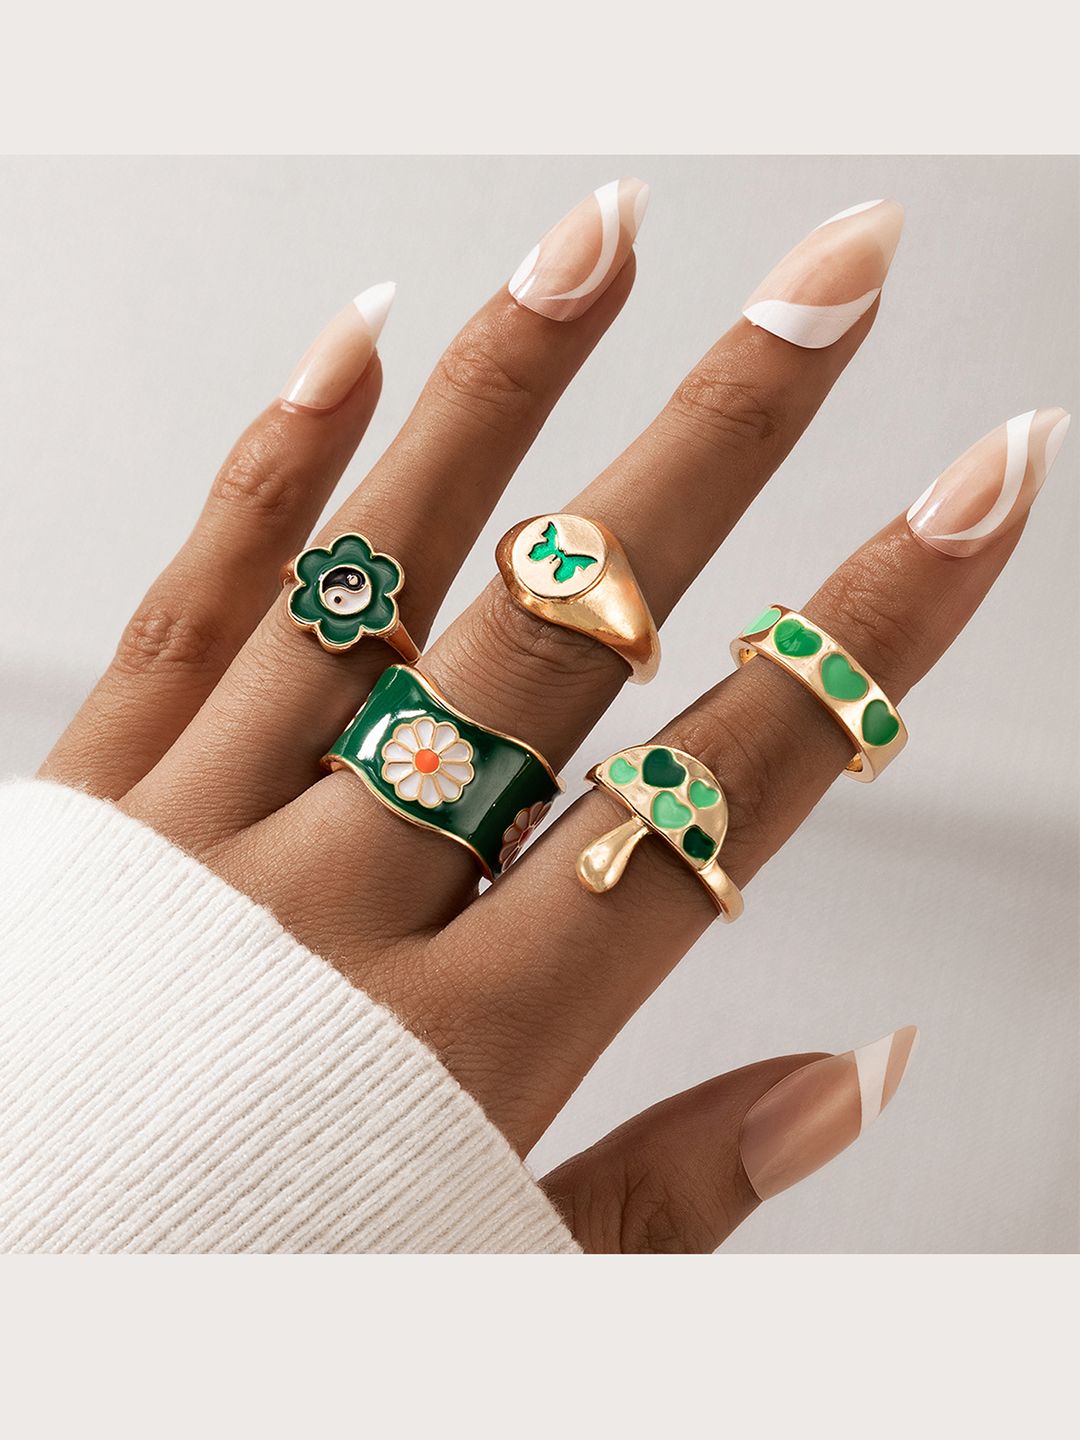 Vembley Set Of 5 Gold-Plated Green-Colored Designed Finger Rings Price in India